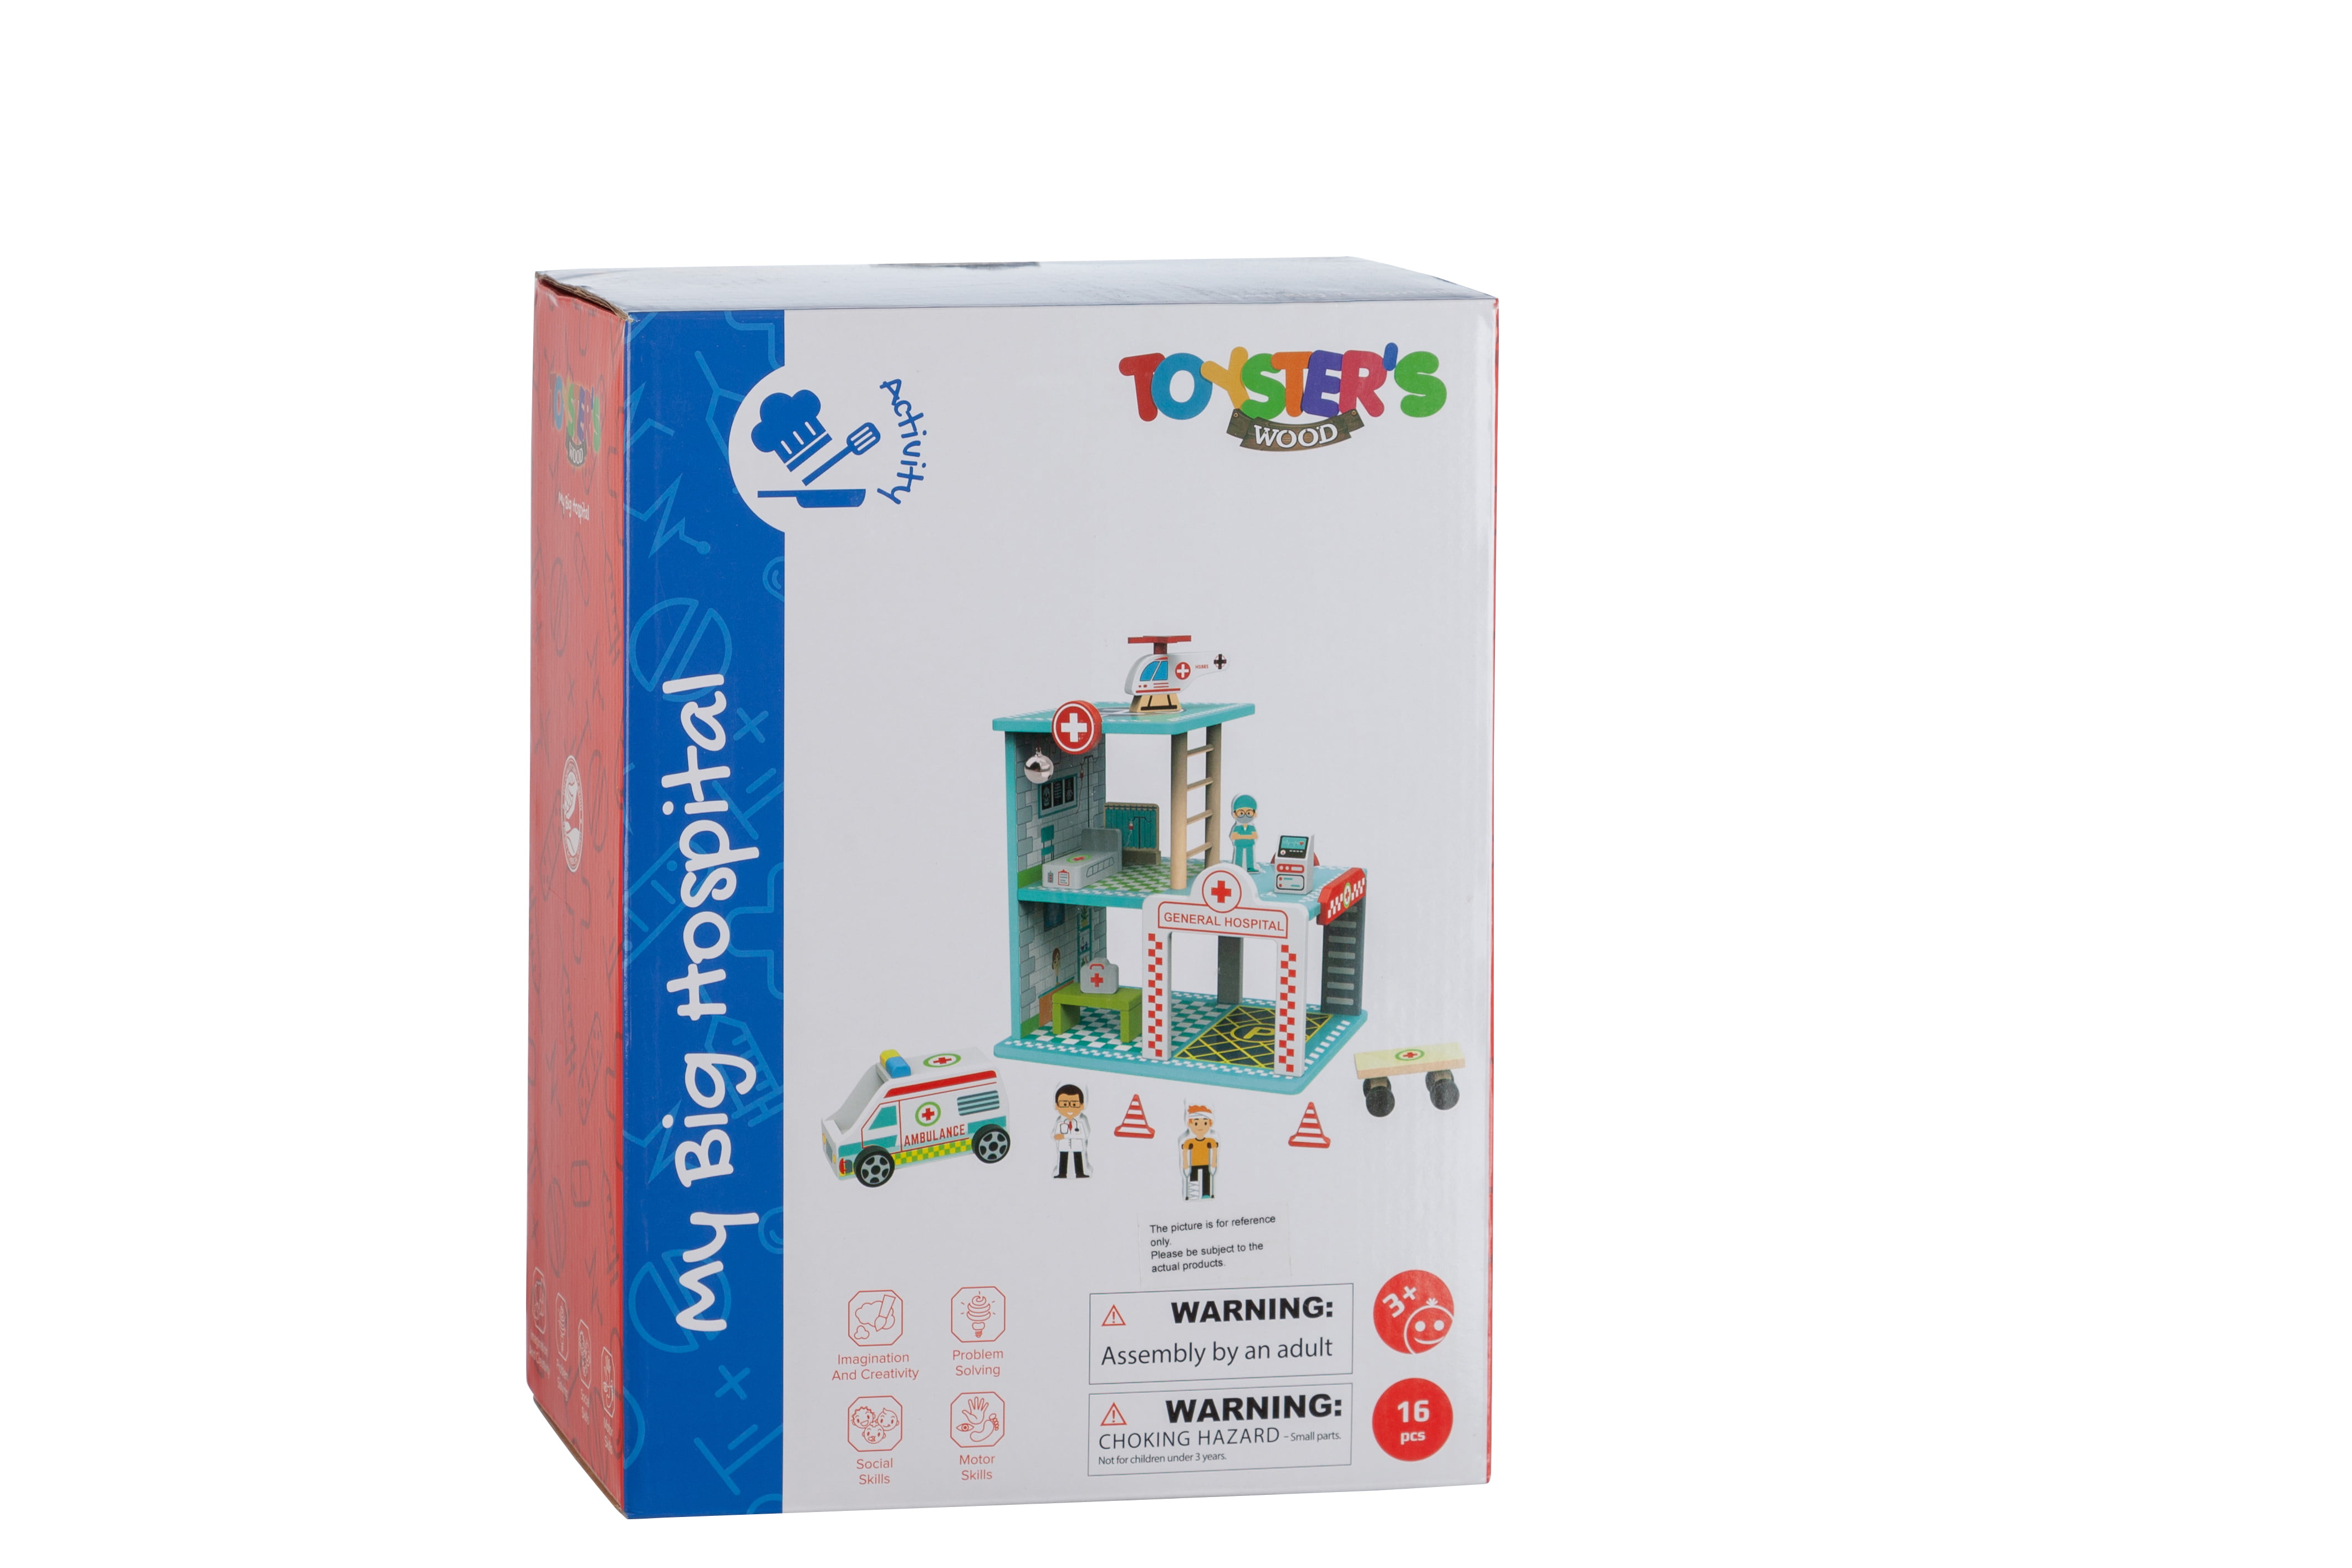 Toysters My Big Hospital Station Wooden Emergency Vehicle PlaysetDoll House 